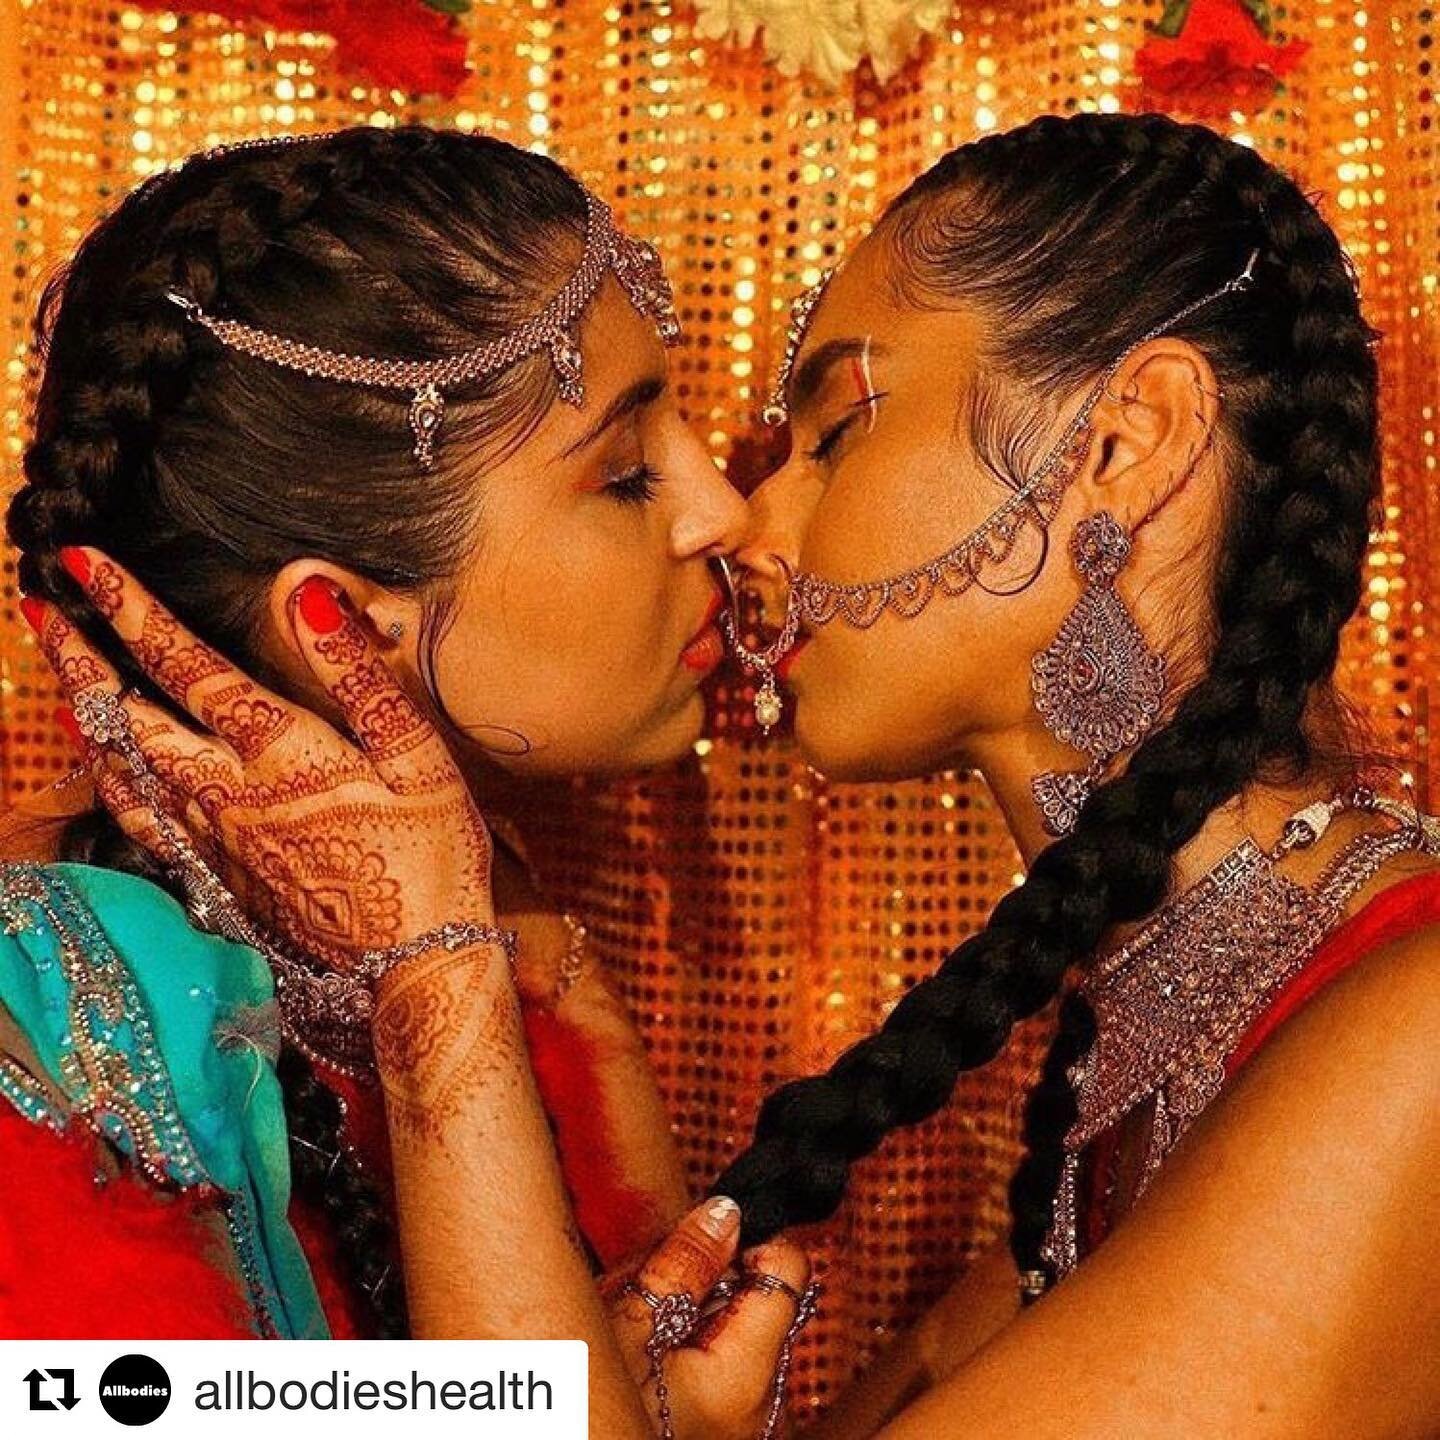 Thank you to @allbodies for this excellent reminder of the origin of #pridemonth. Please consider supporting @wovenbodies - a #lgbtqia black- and female-identifying-fun online platform that offers support for LGBTQIA families. Their fundraiser is goi